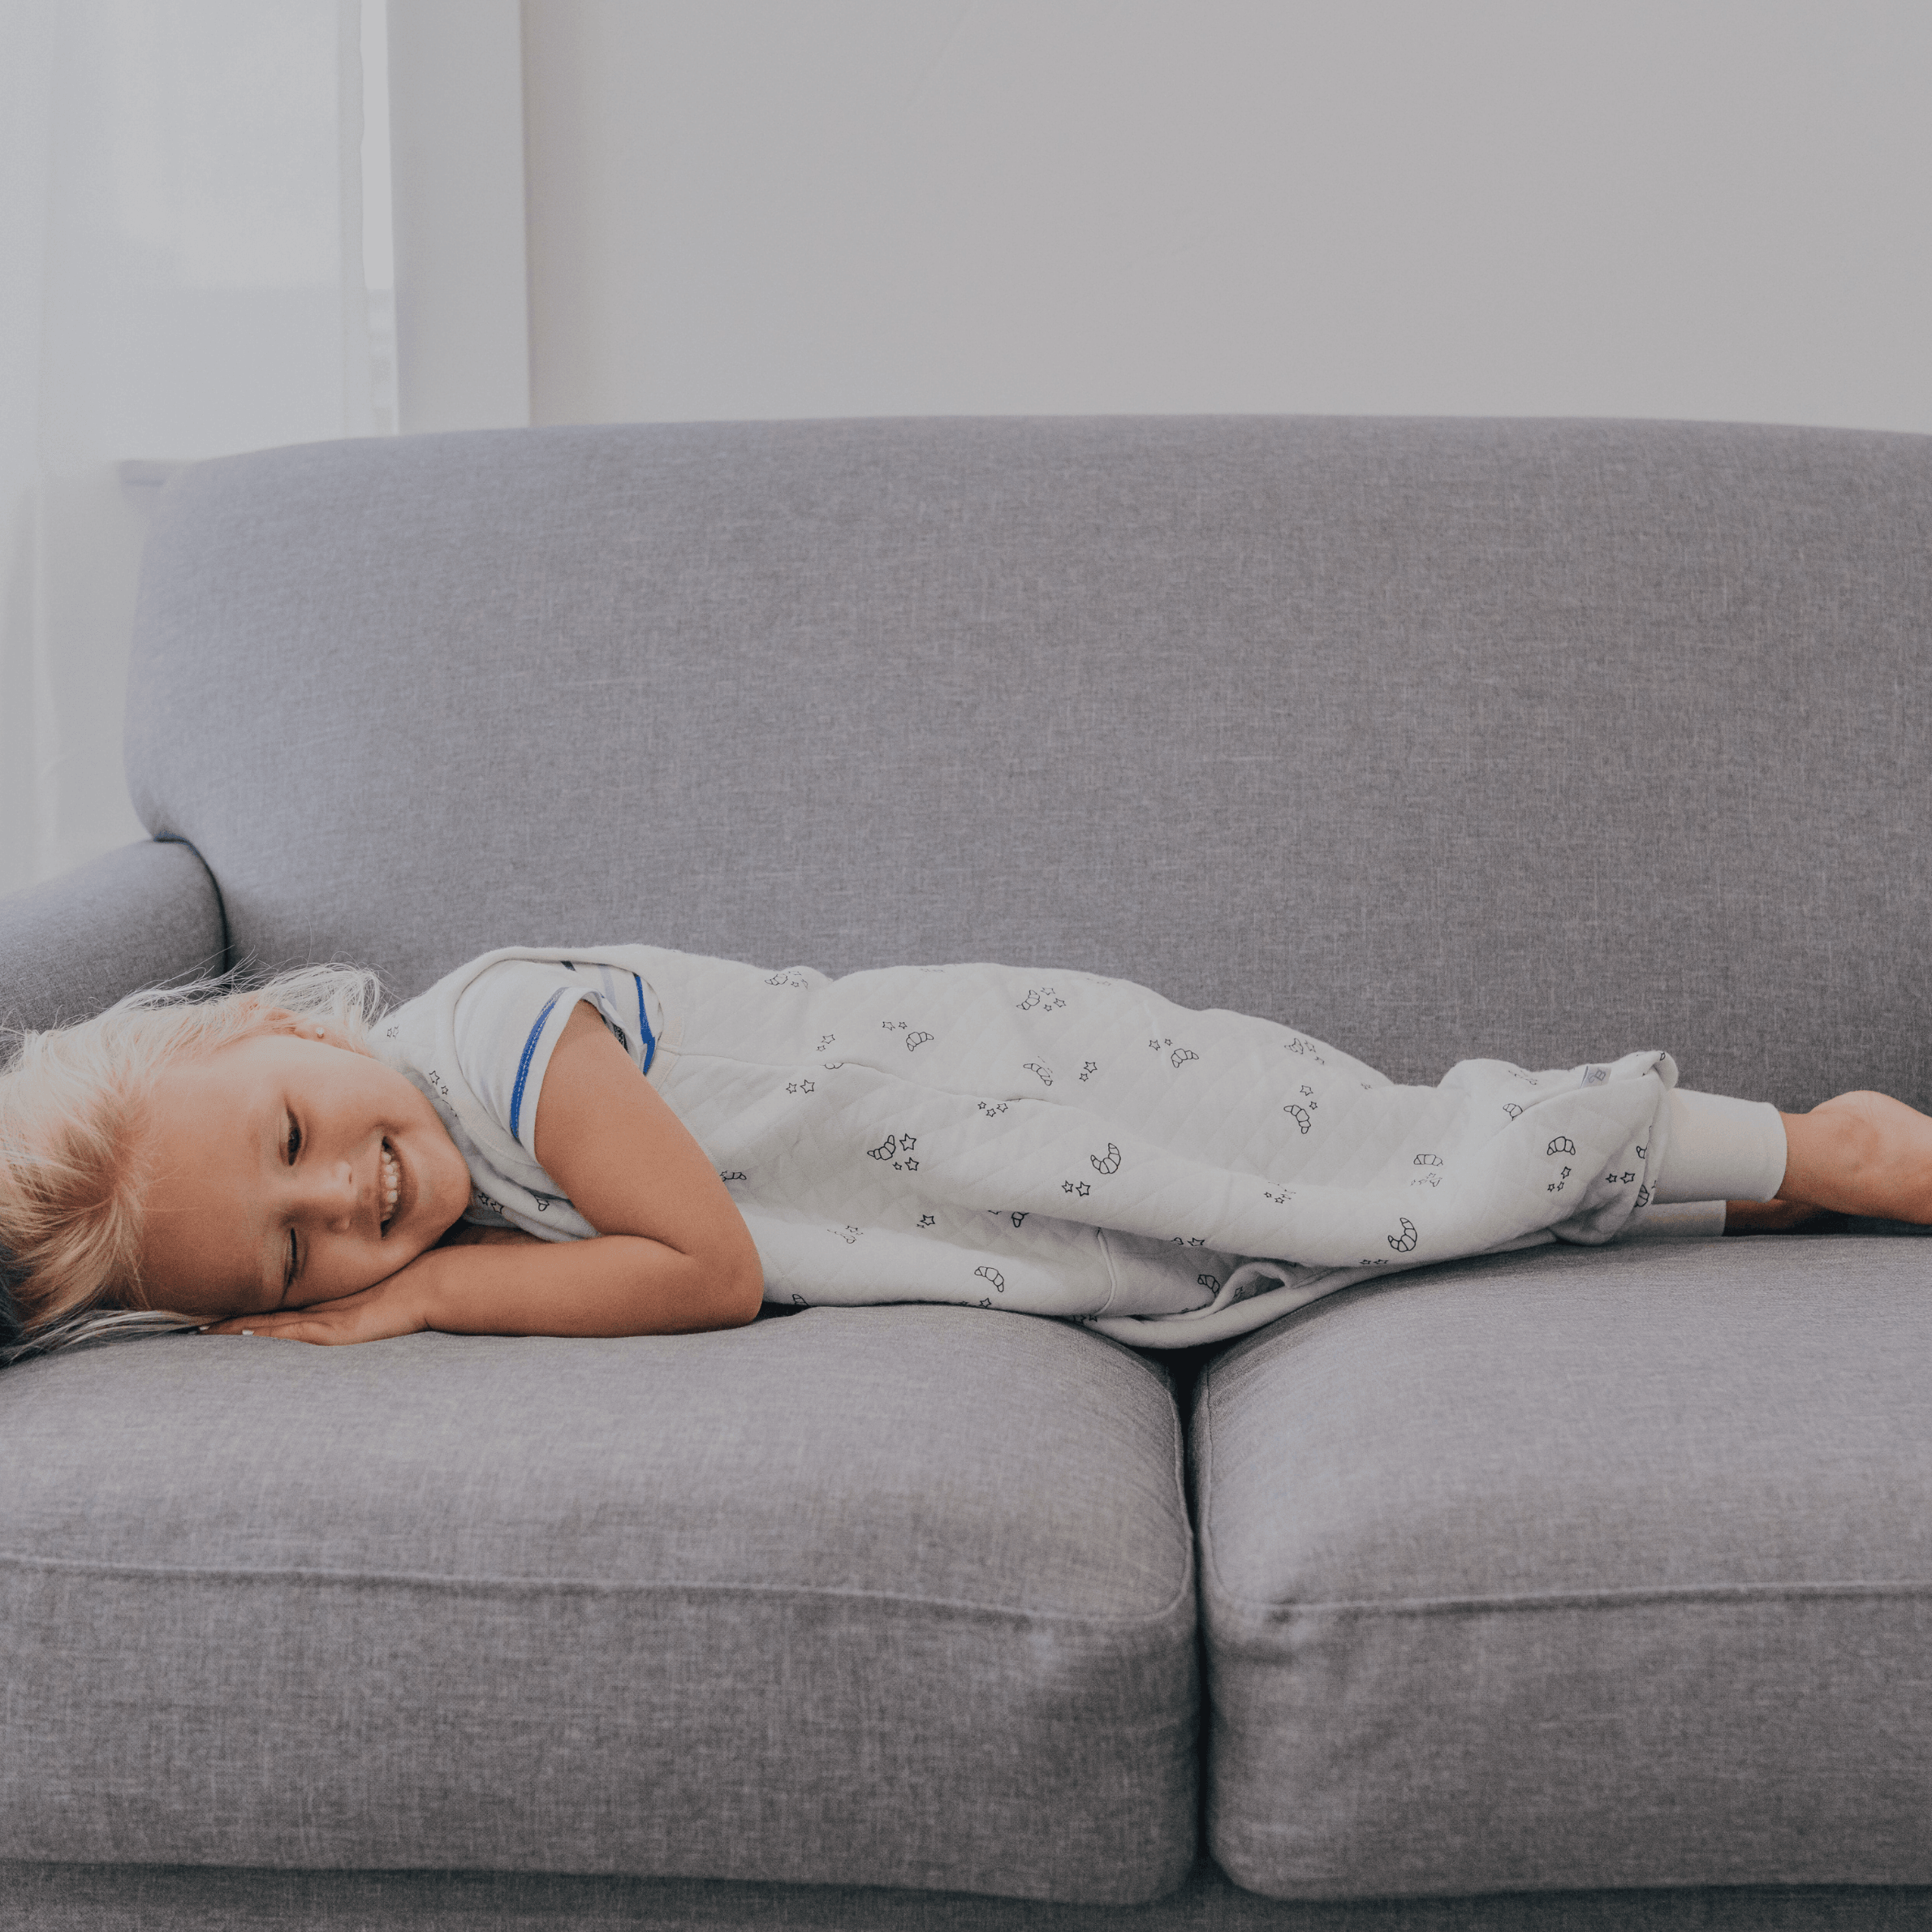 Toddler Nap on the Couch with Wearable Blanket - Tealbee Dreamsuit